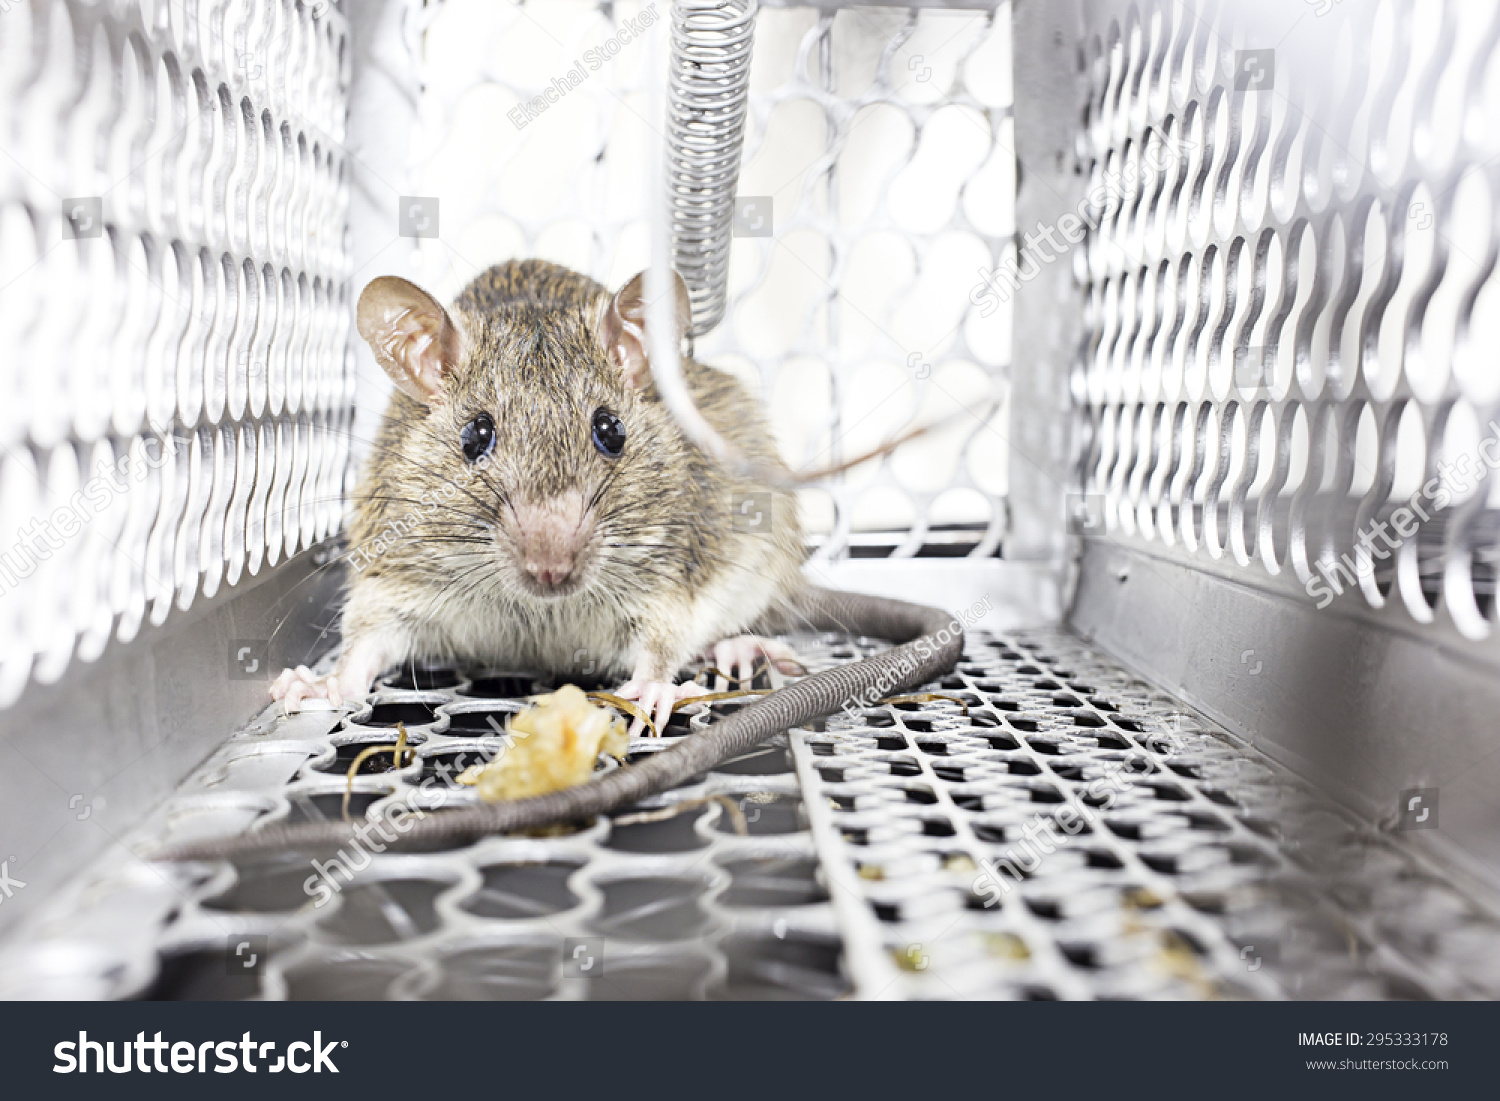 Rat in a spring-trap. #295333178